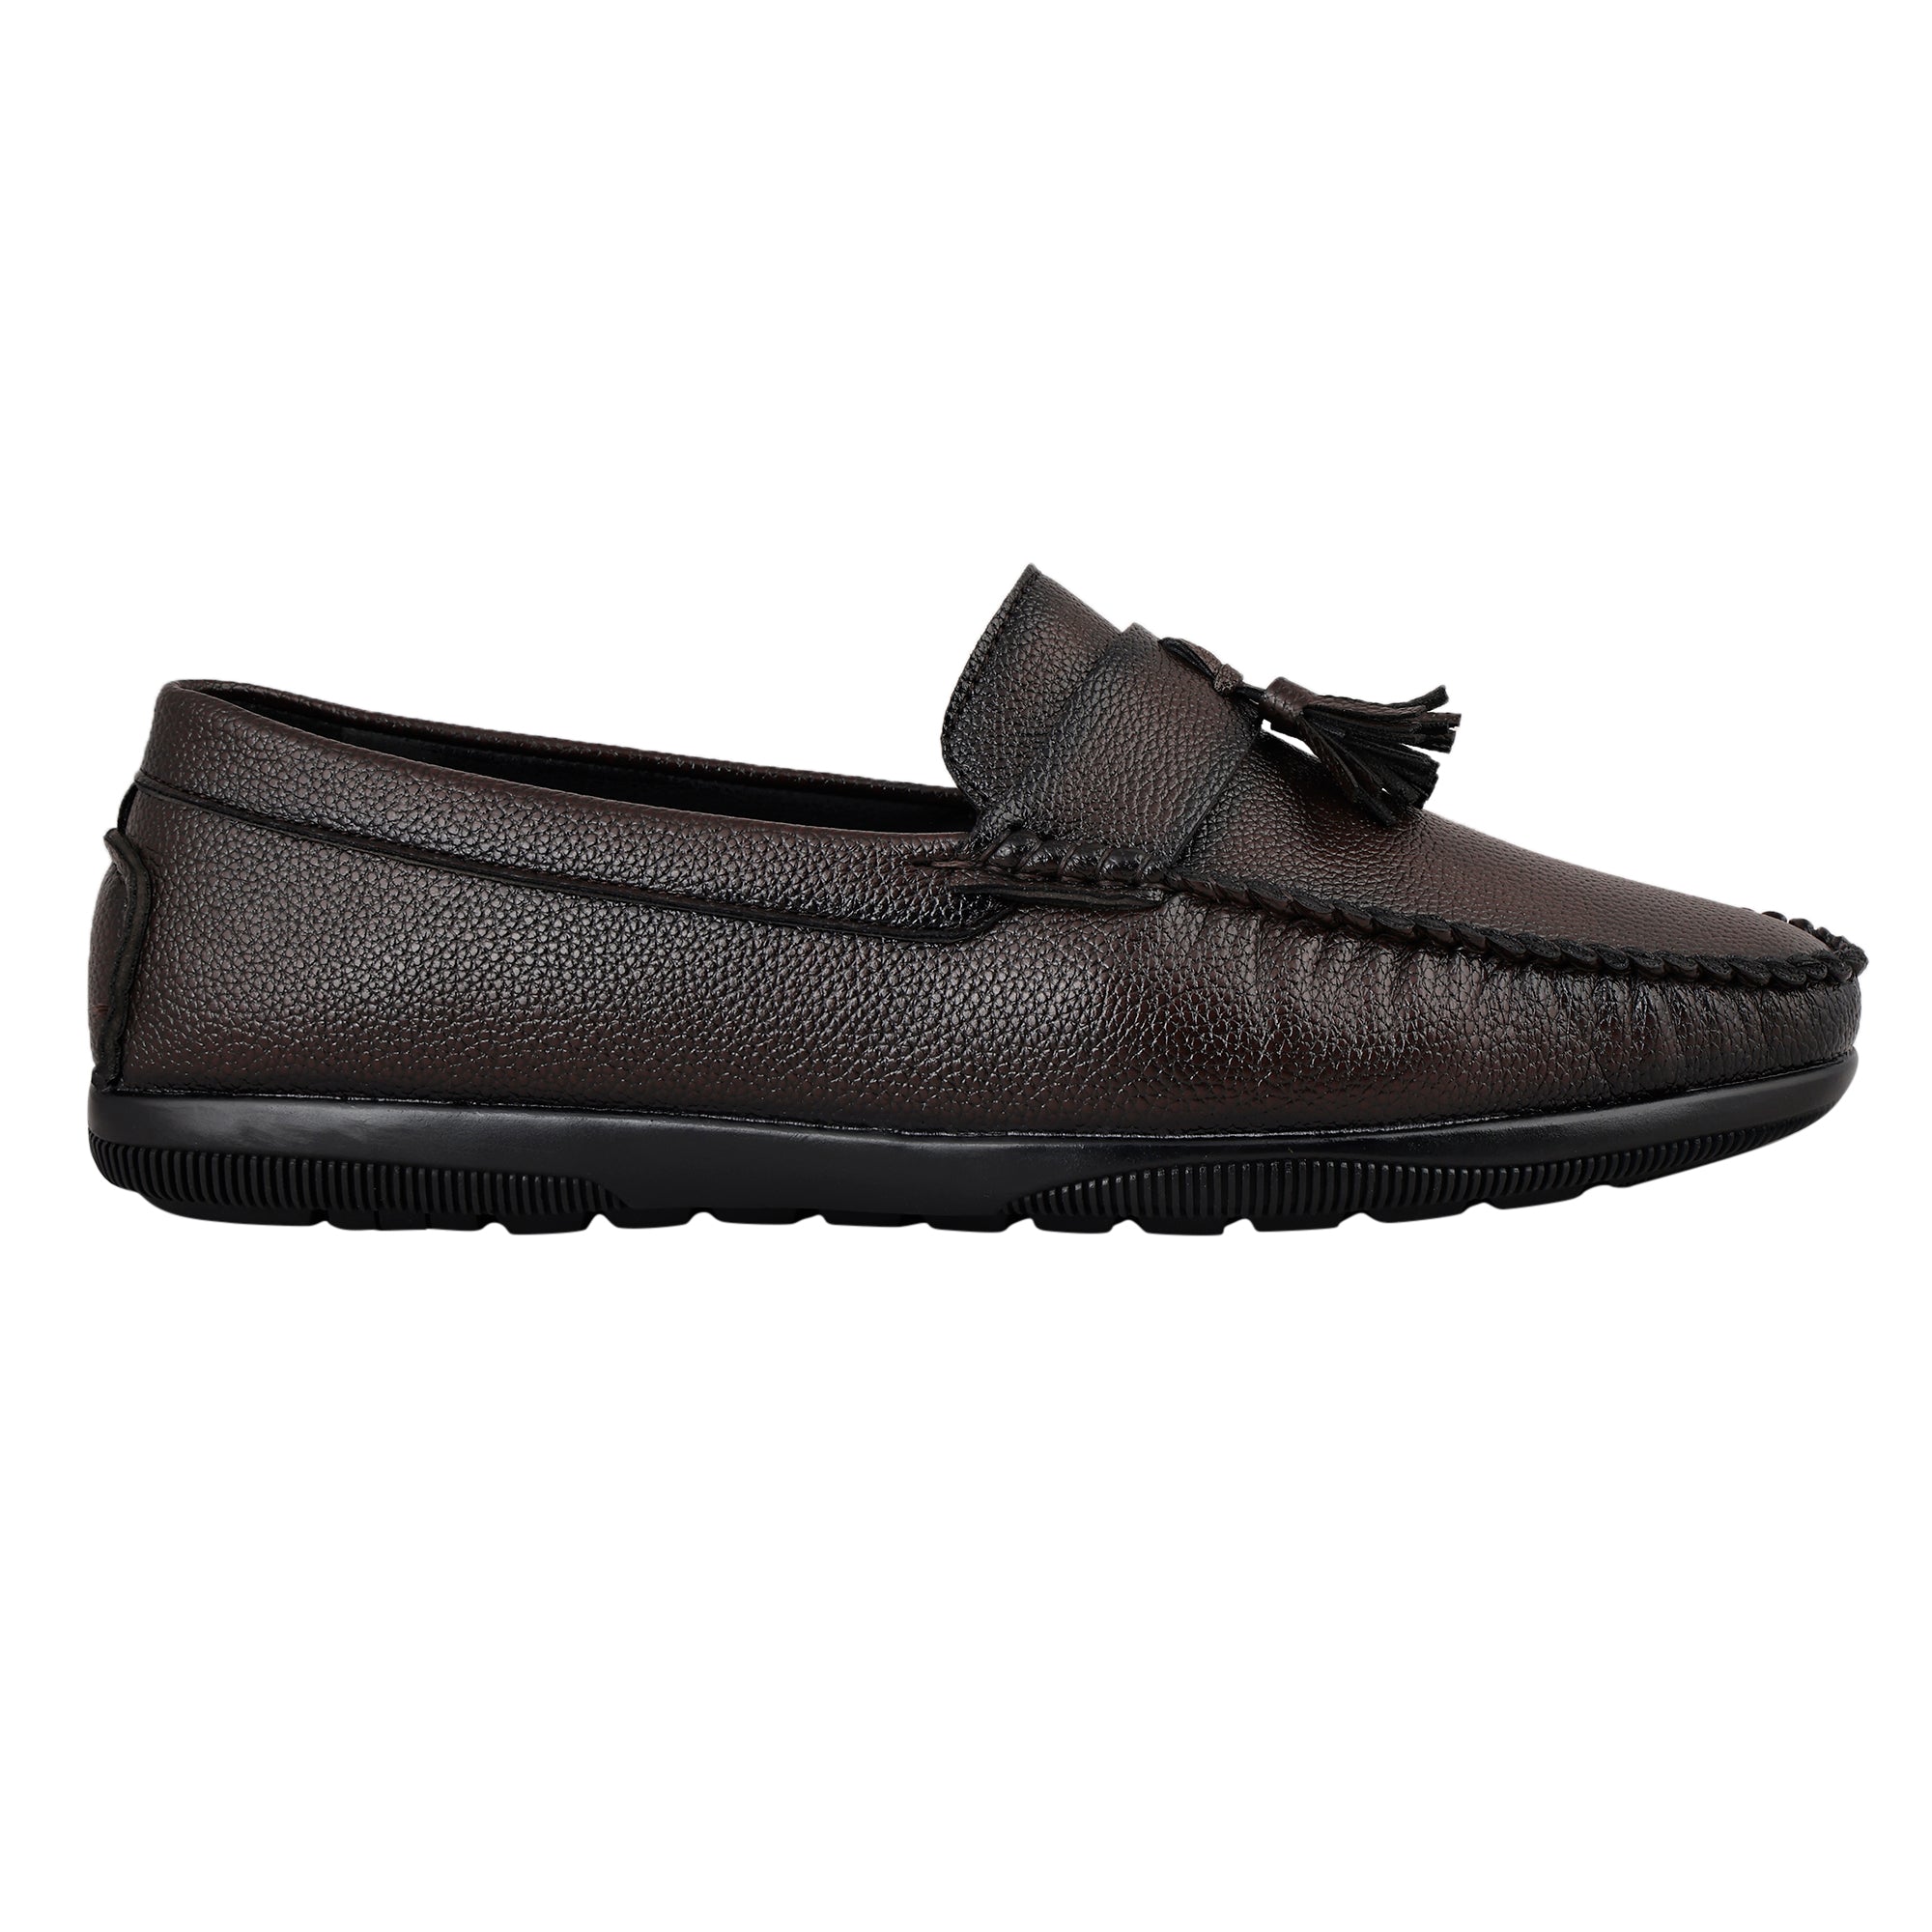 LB 47A Brunette Brown Slip On Style Loafer Most Comfortable Doctor Insole With Wrinkle Free Fox Leather Loafers.